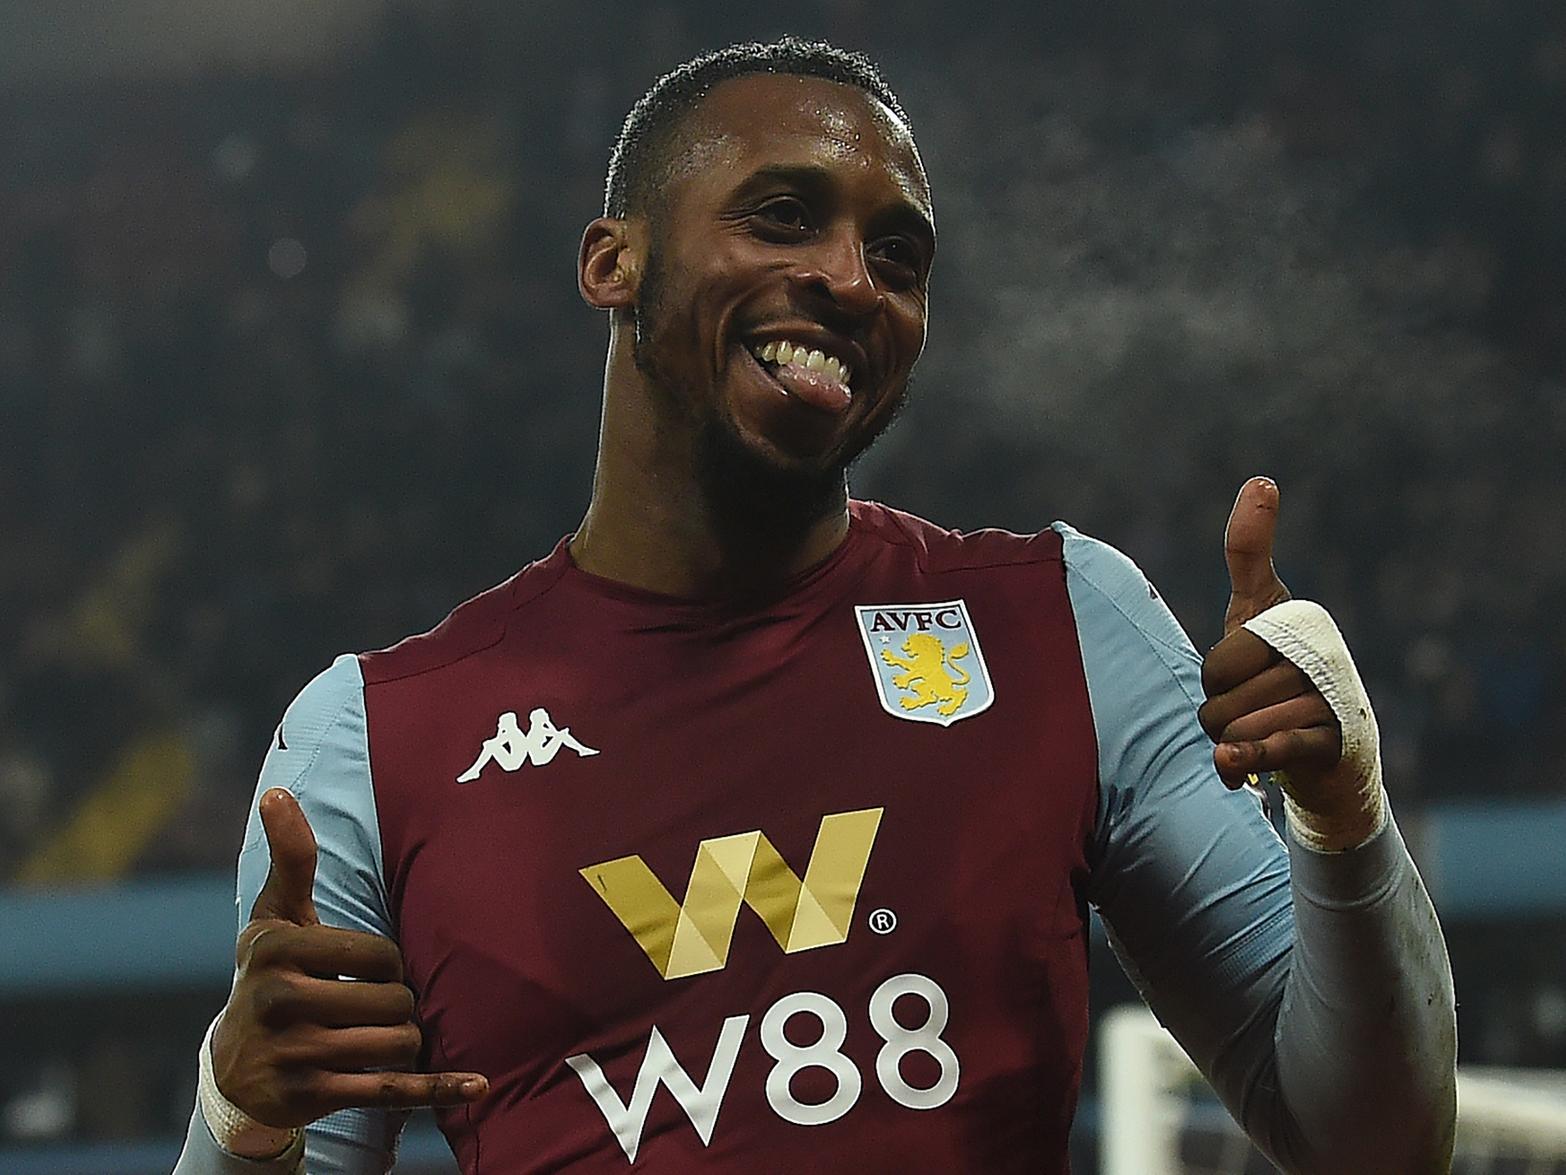 Cardiff City have batted away suggestions that they're interested in signing former Aston Villa striker Jonathan Kodjia, as they believe they already have enough attacking options. (Wales Online)